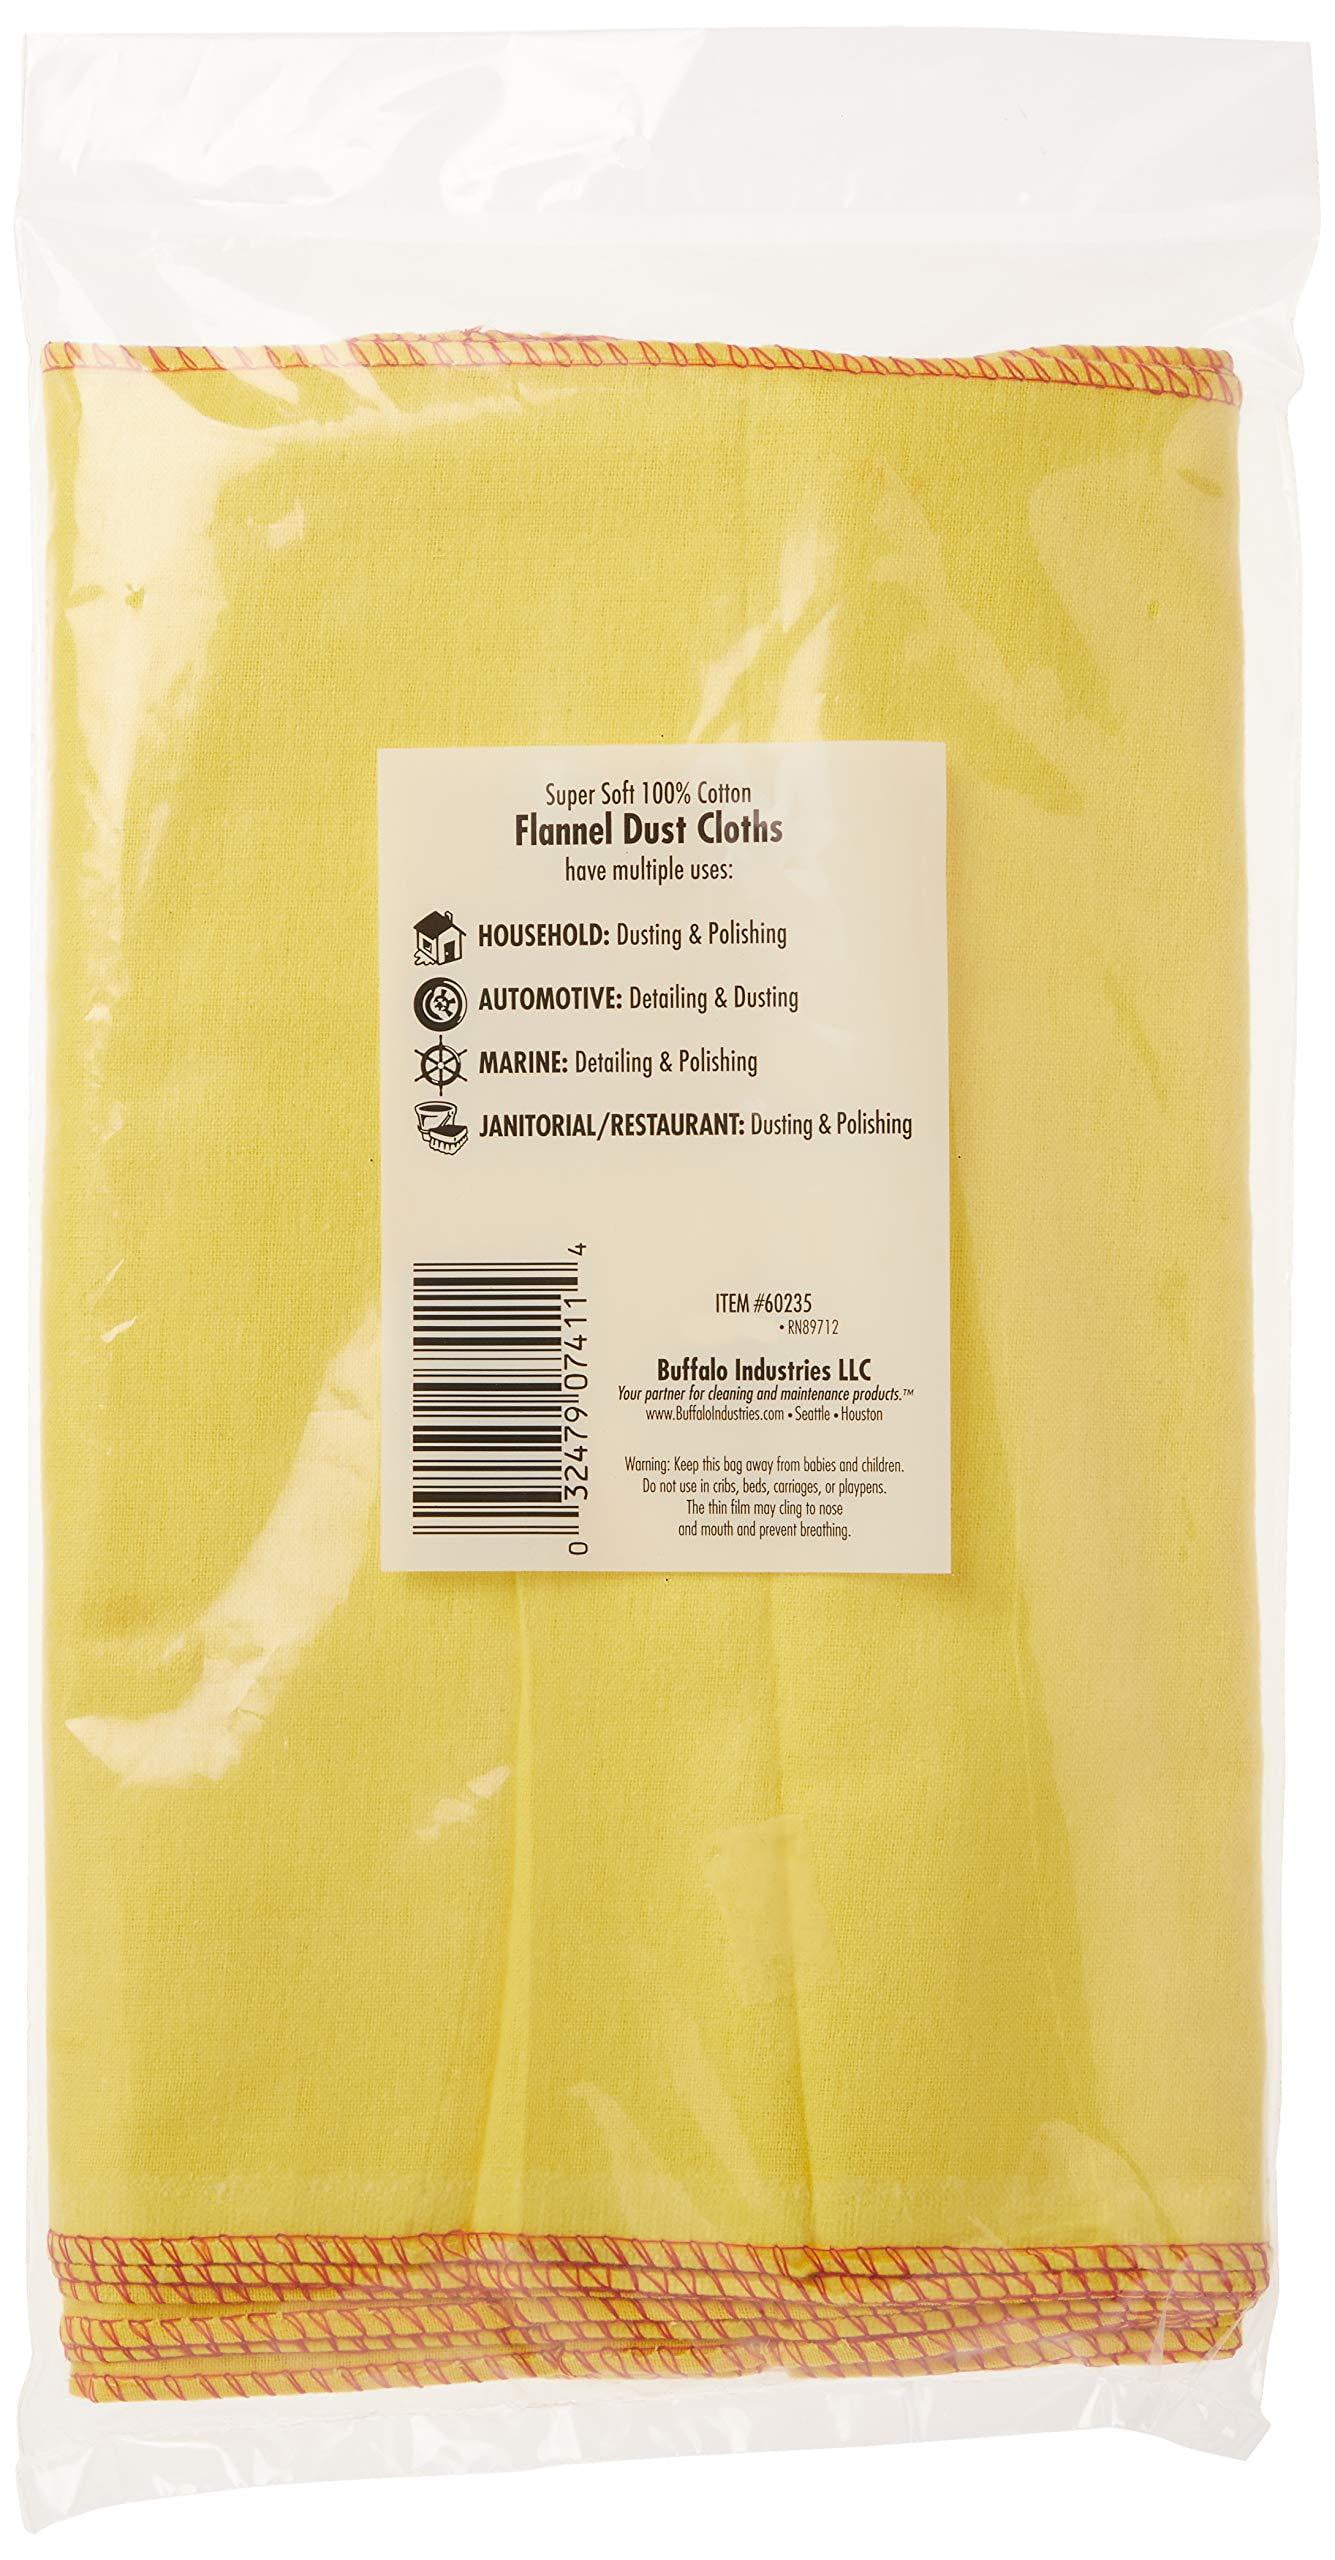 13 X 24 Flannel Dust Cloth Buffalo Industries pack of 12 for sale online 60235 